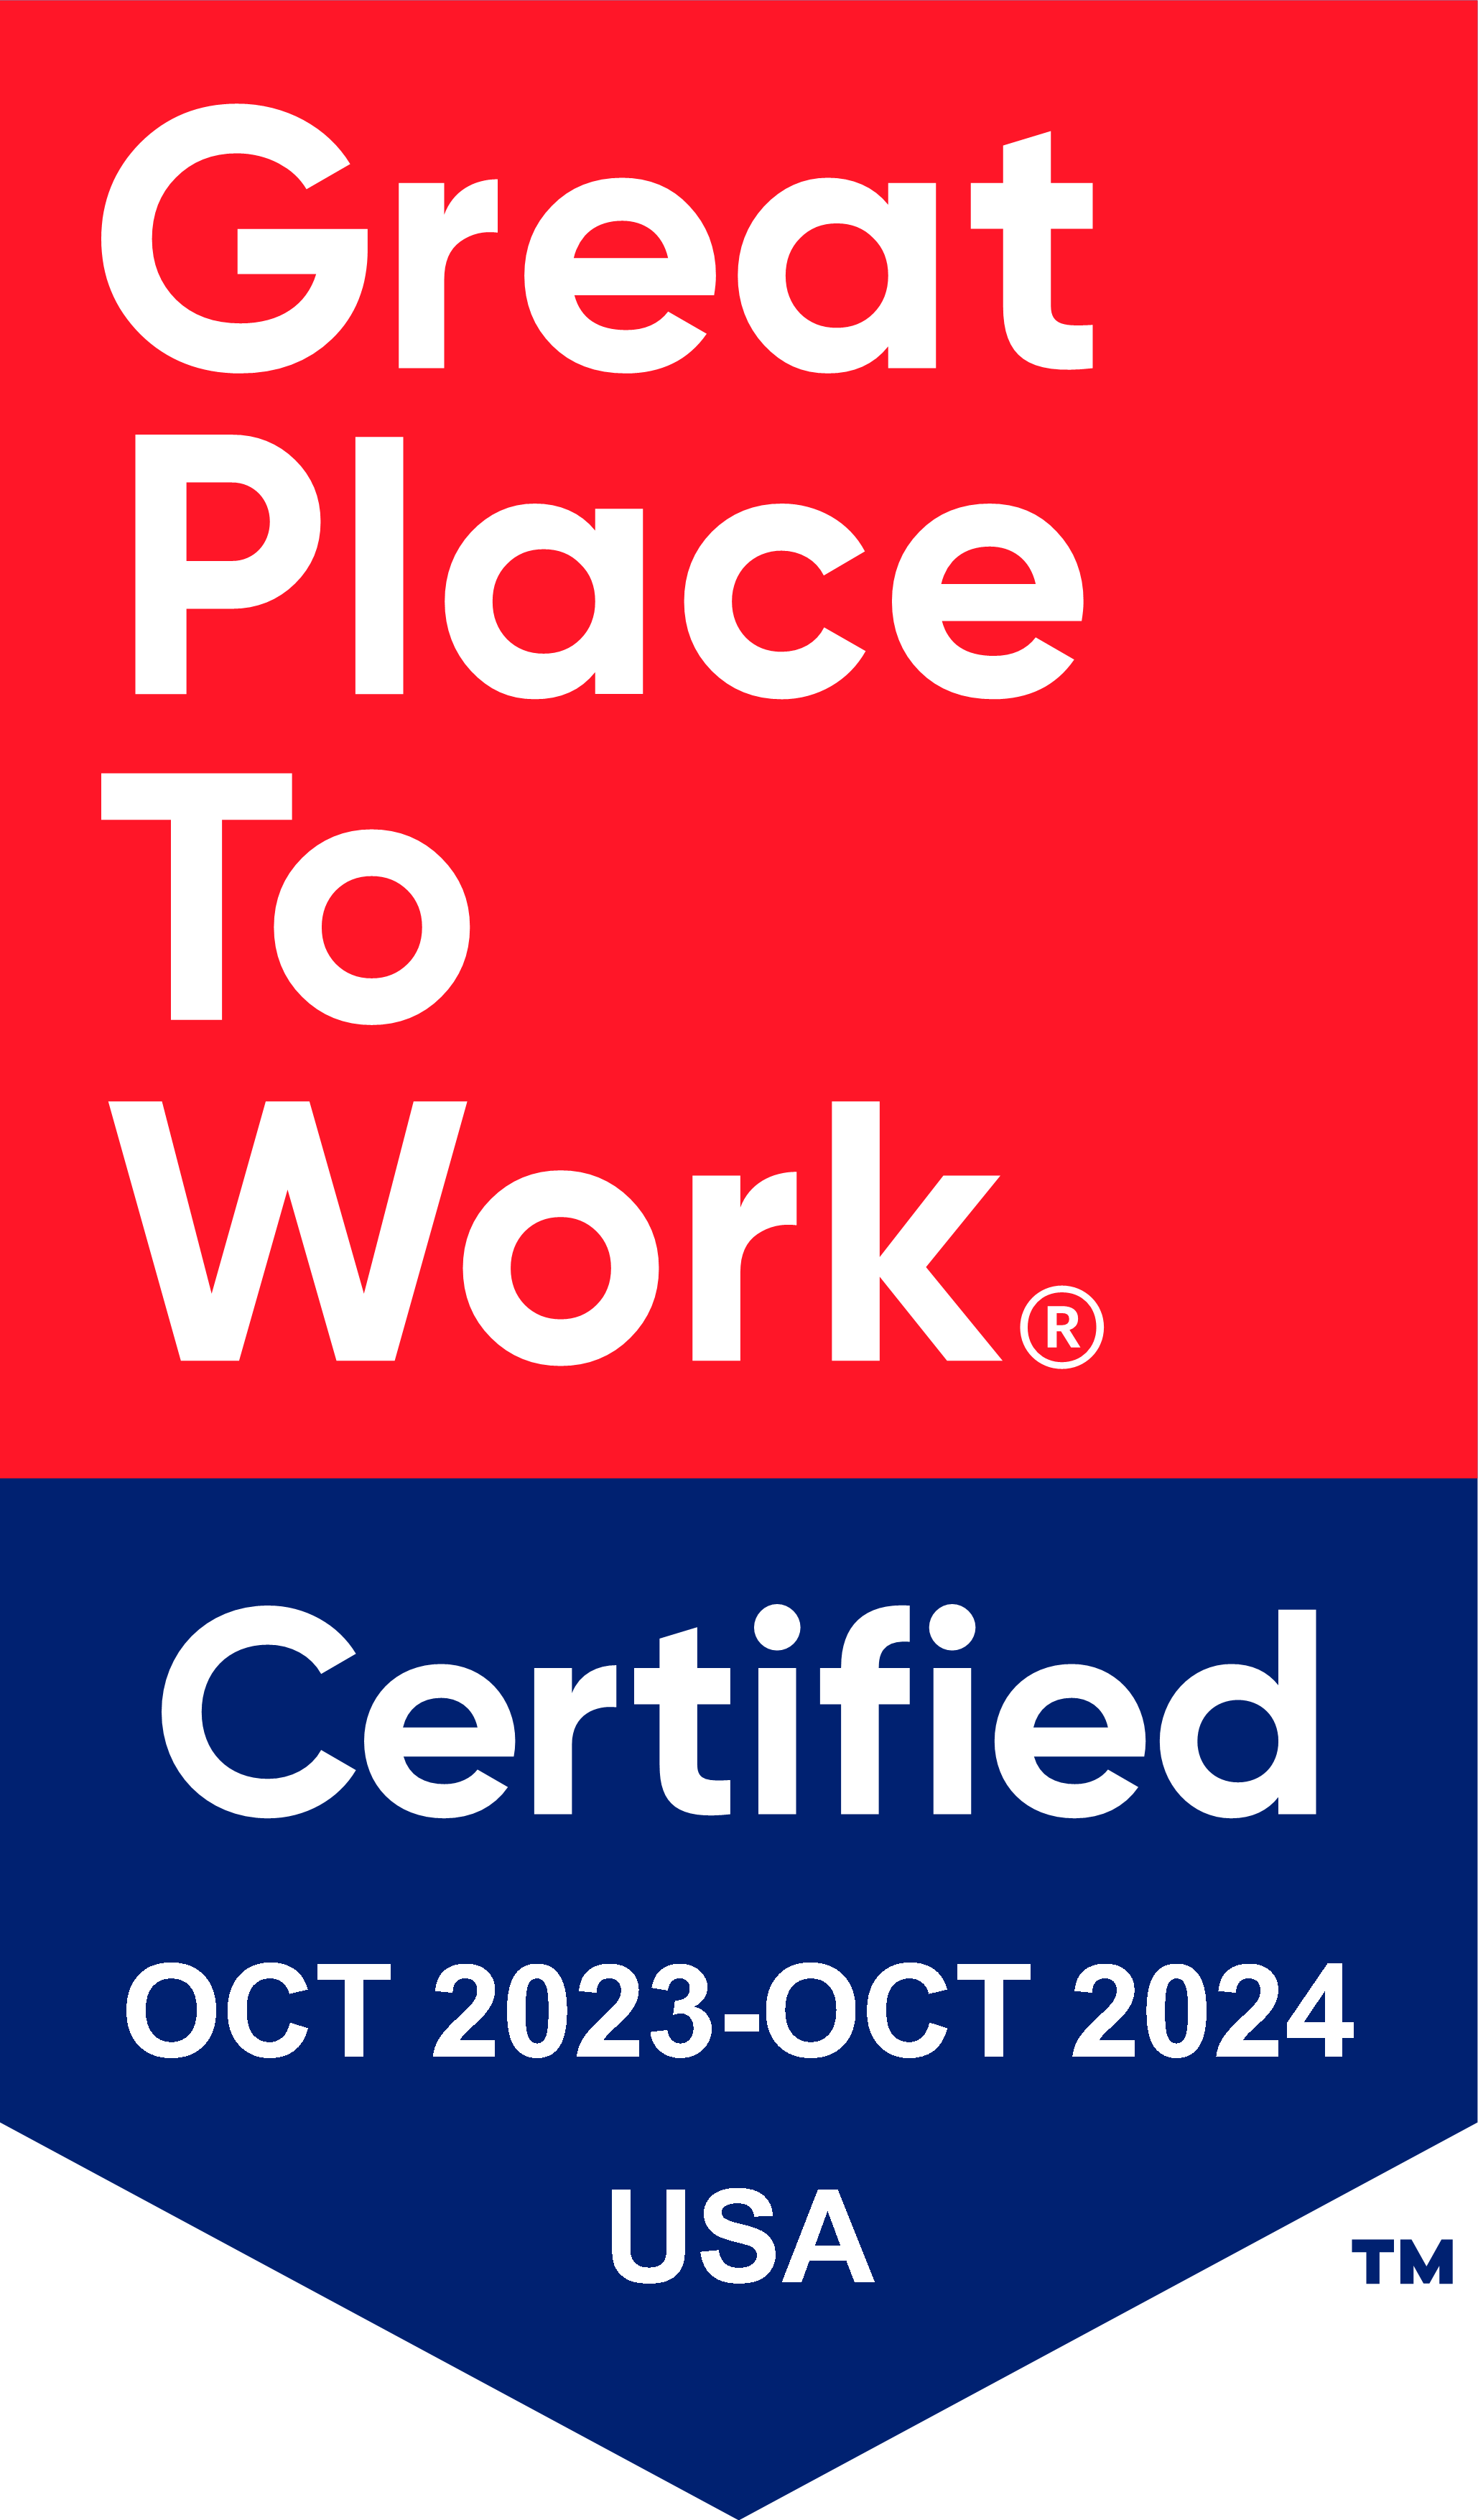 Great Place to Work certified, in 2023